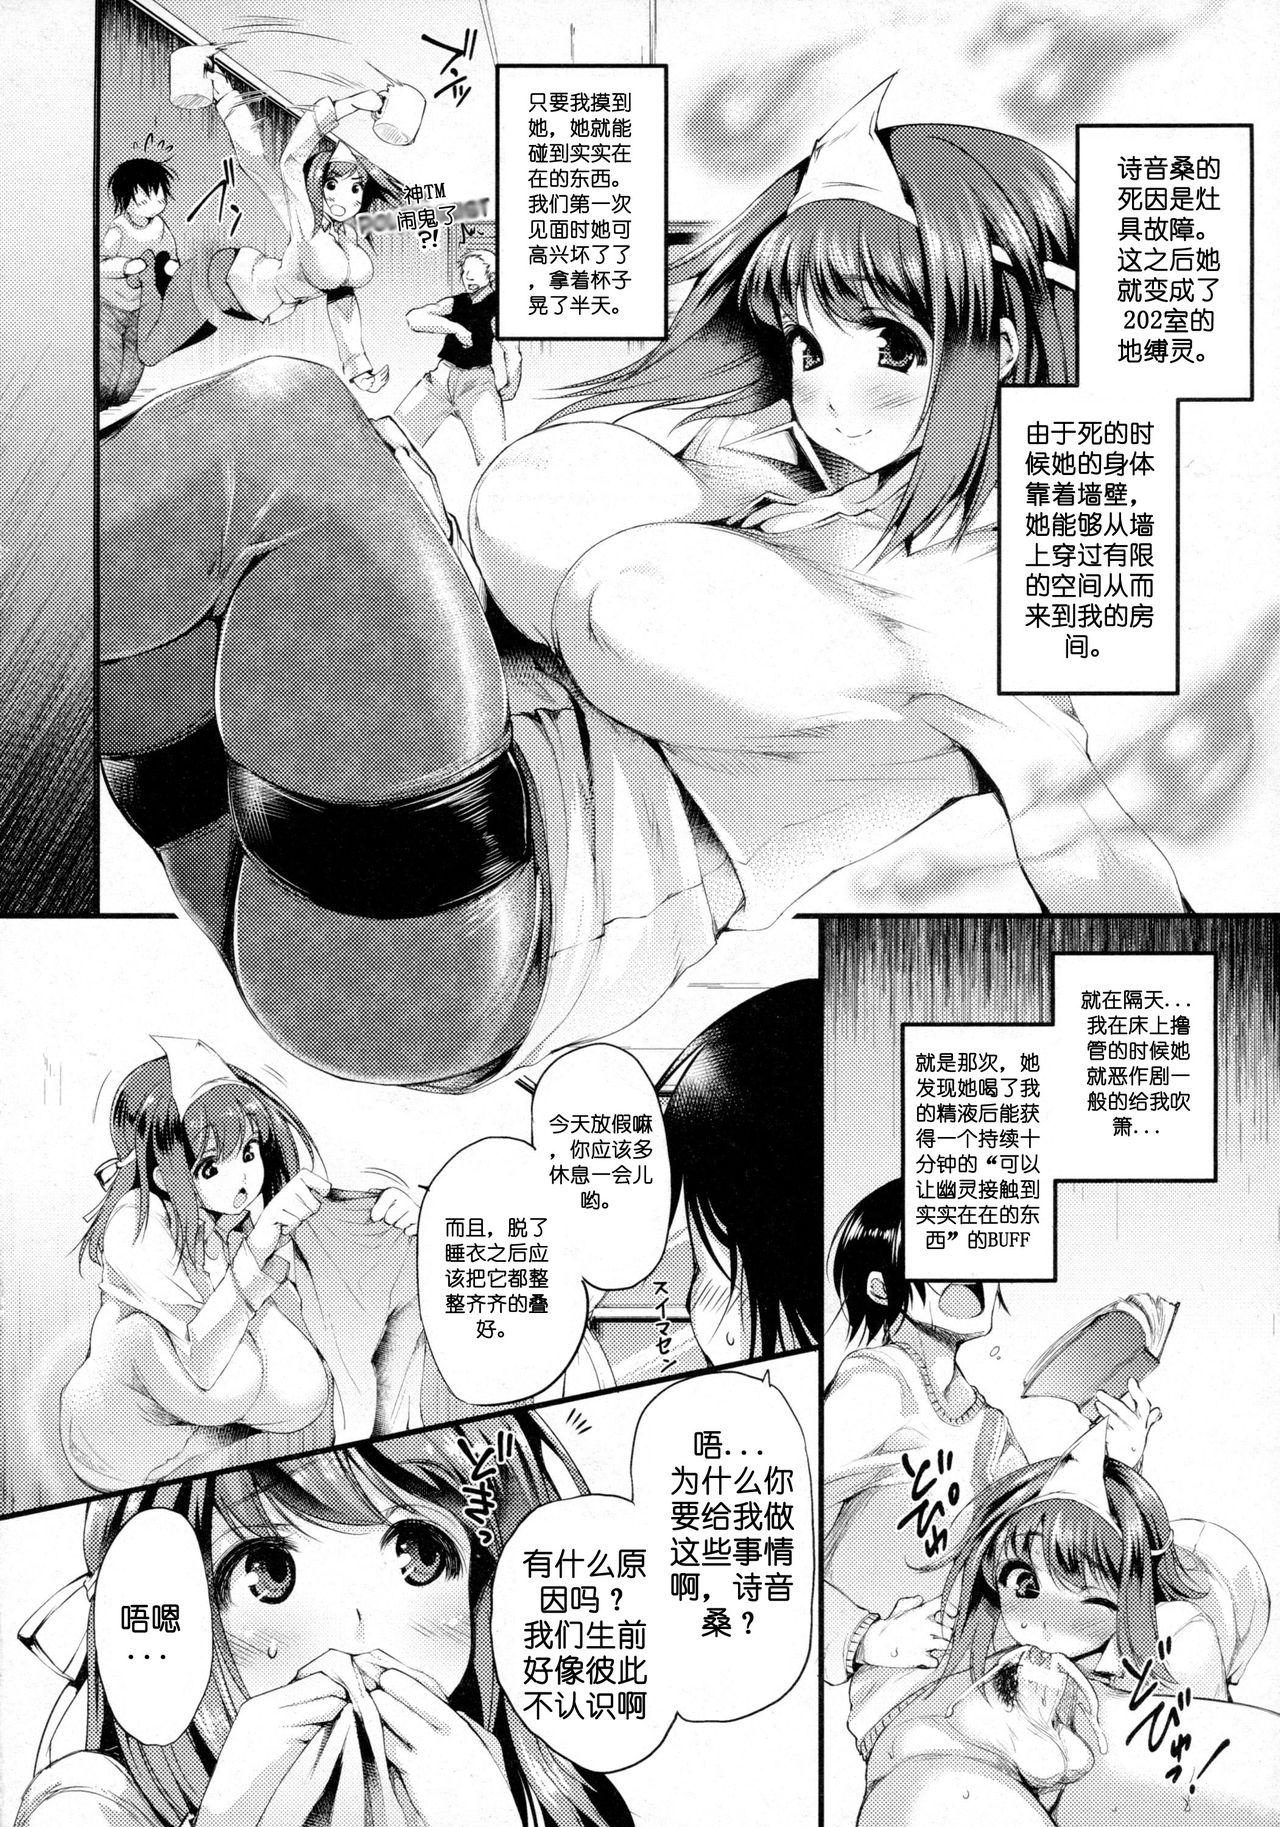 Skype [Oohira Sunset] 202-Goushitsu no Yuurei-san | The Ghost in Room 202 (COMIC Unreal 2016-02 Vol. 59) [Chinese] [简称天子个人汉化] (Ongoing) Dominate - Page 2